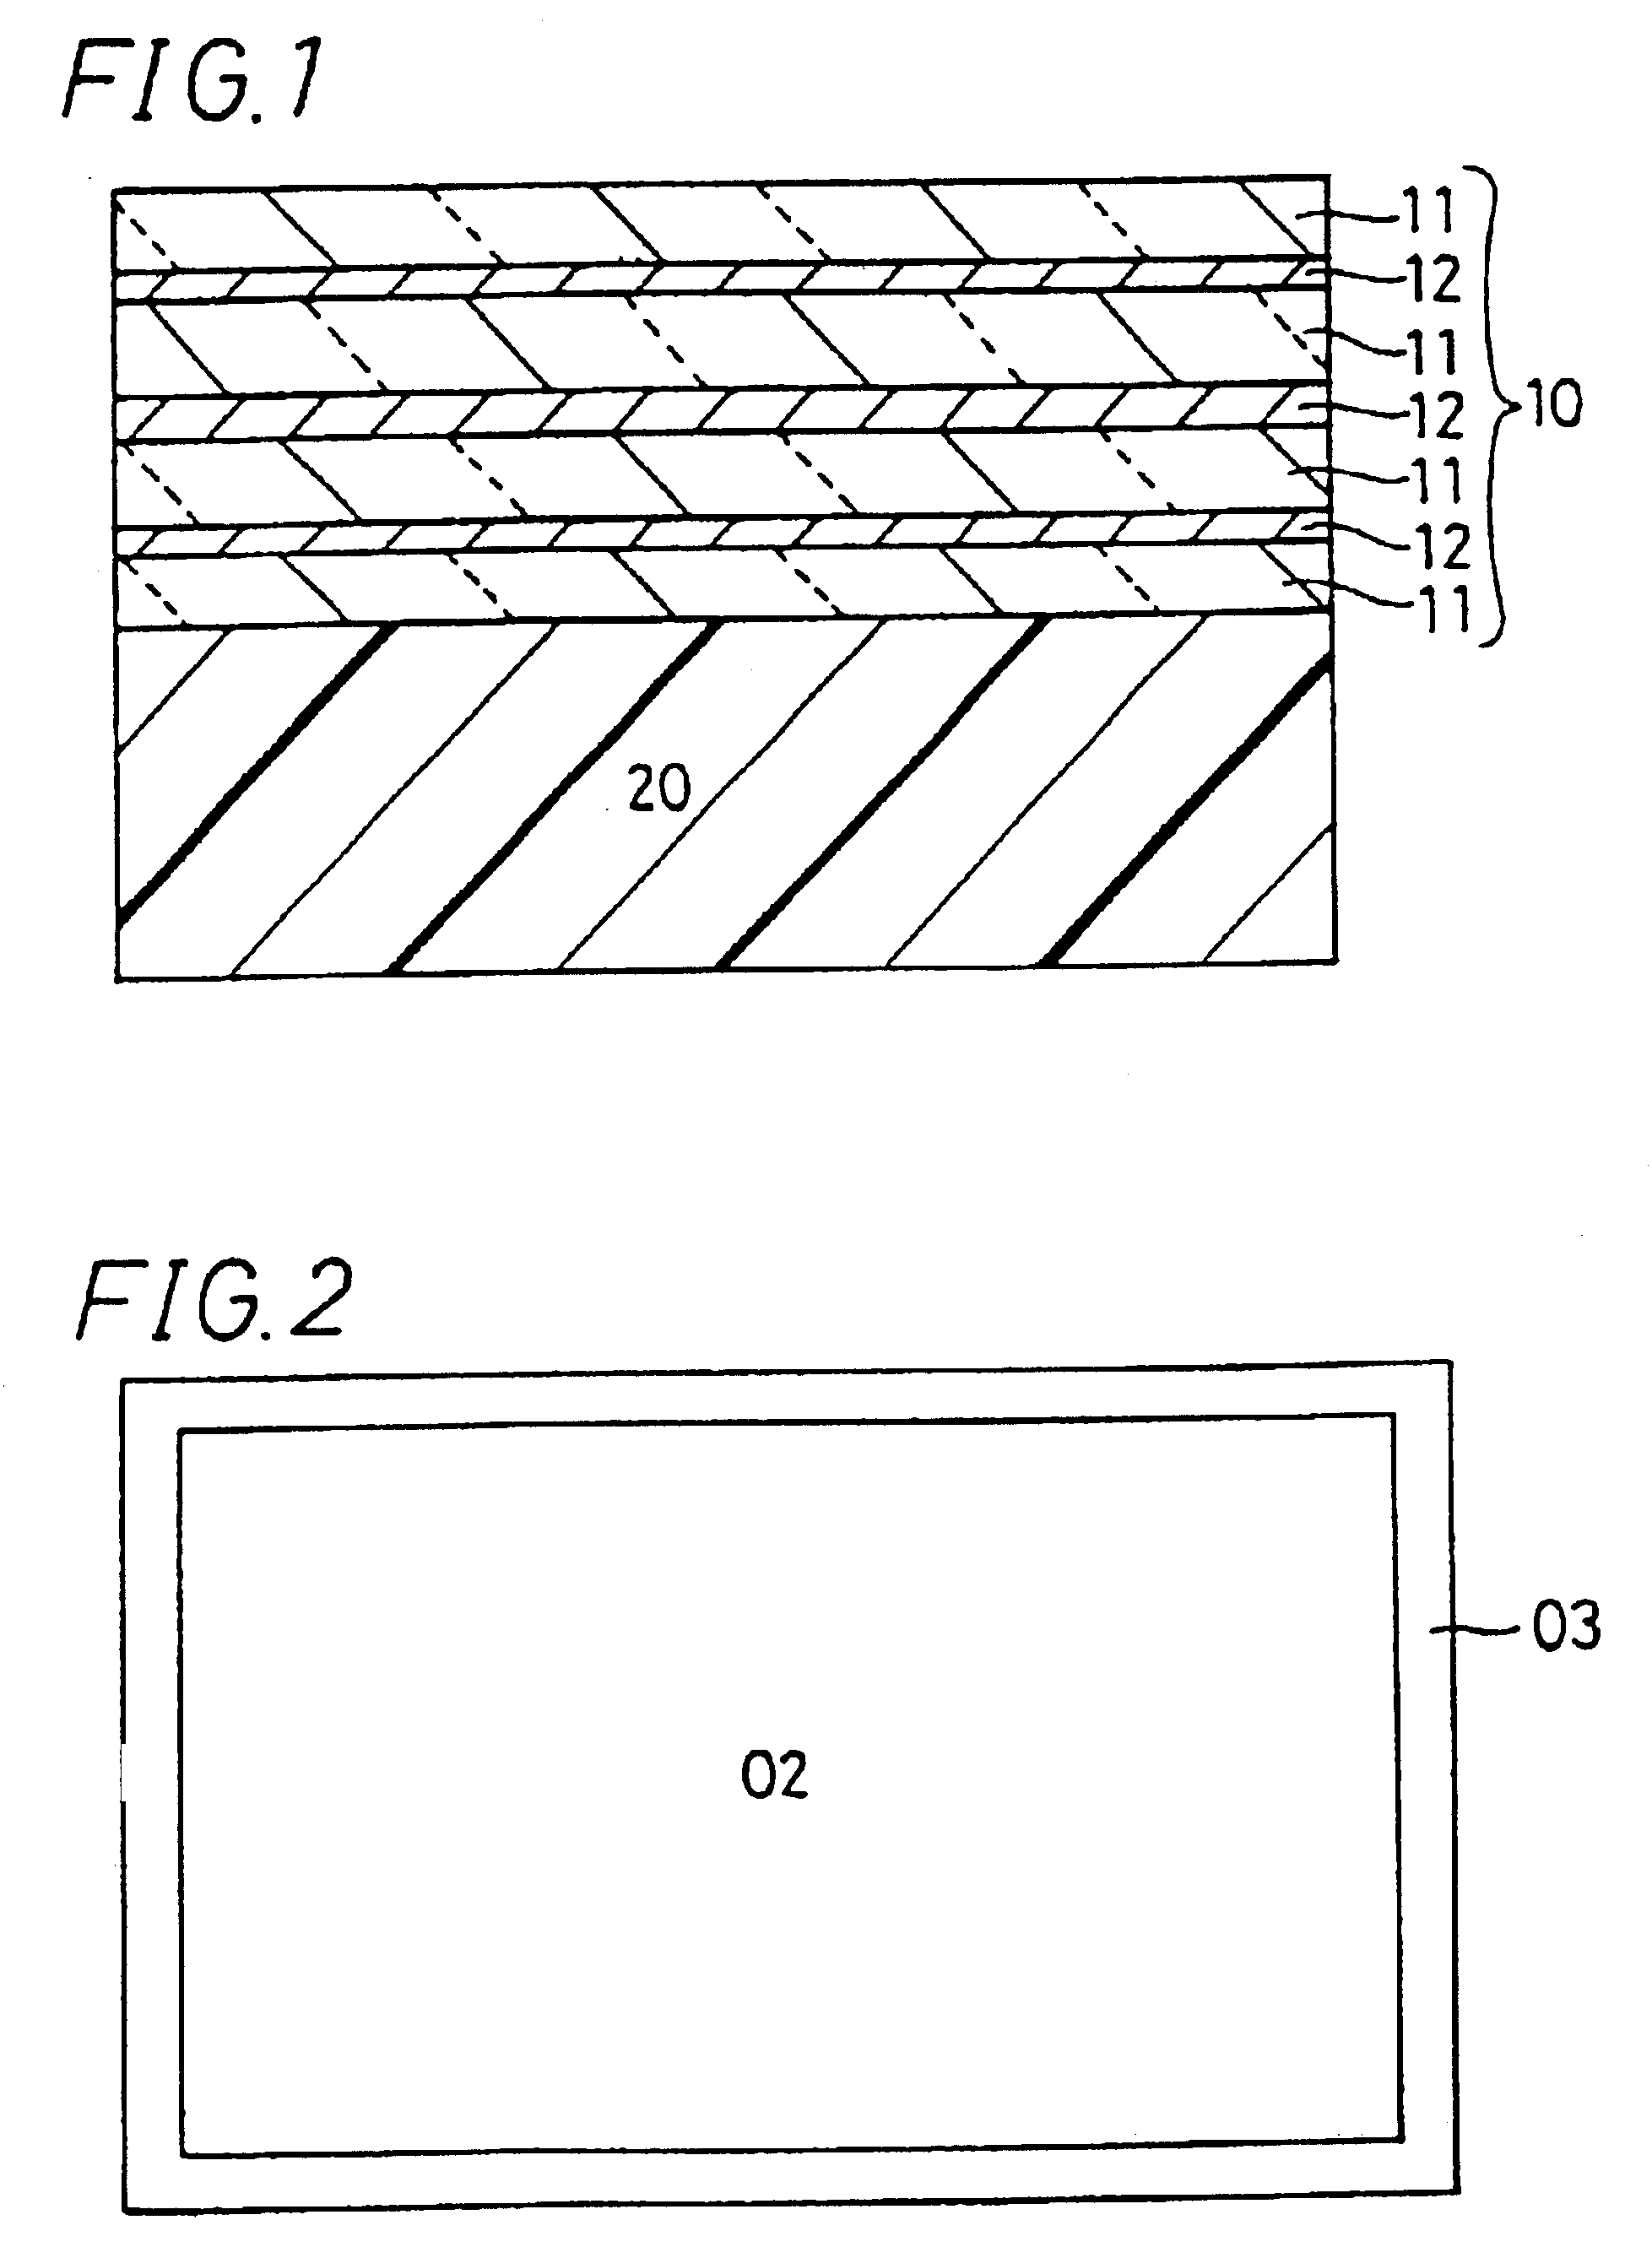 Display filter, display apparatus, and method for production of the same